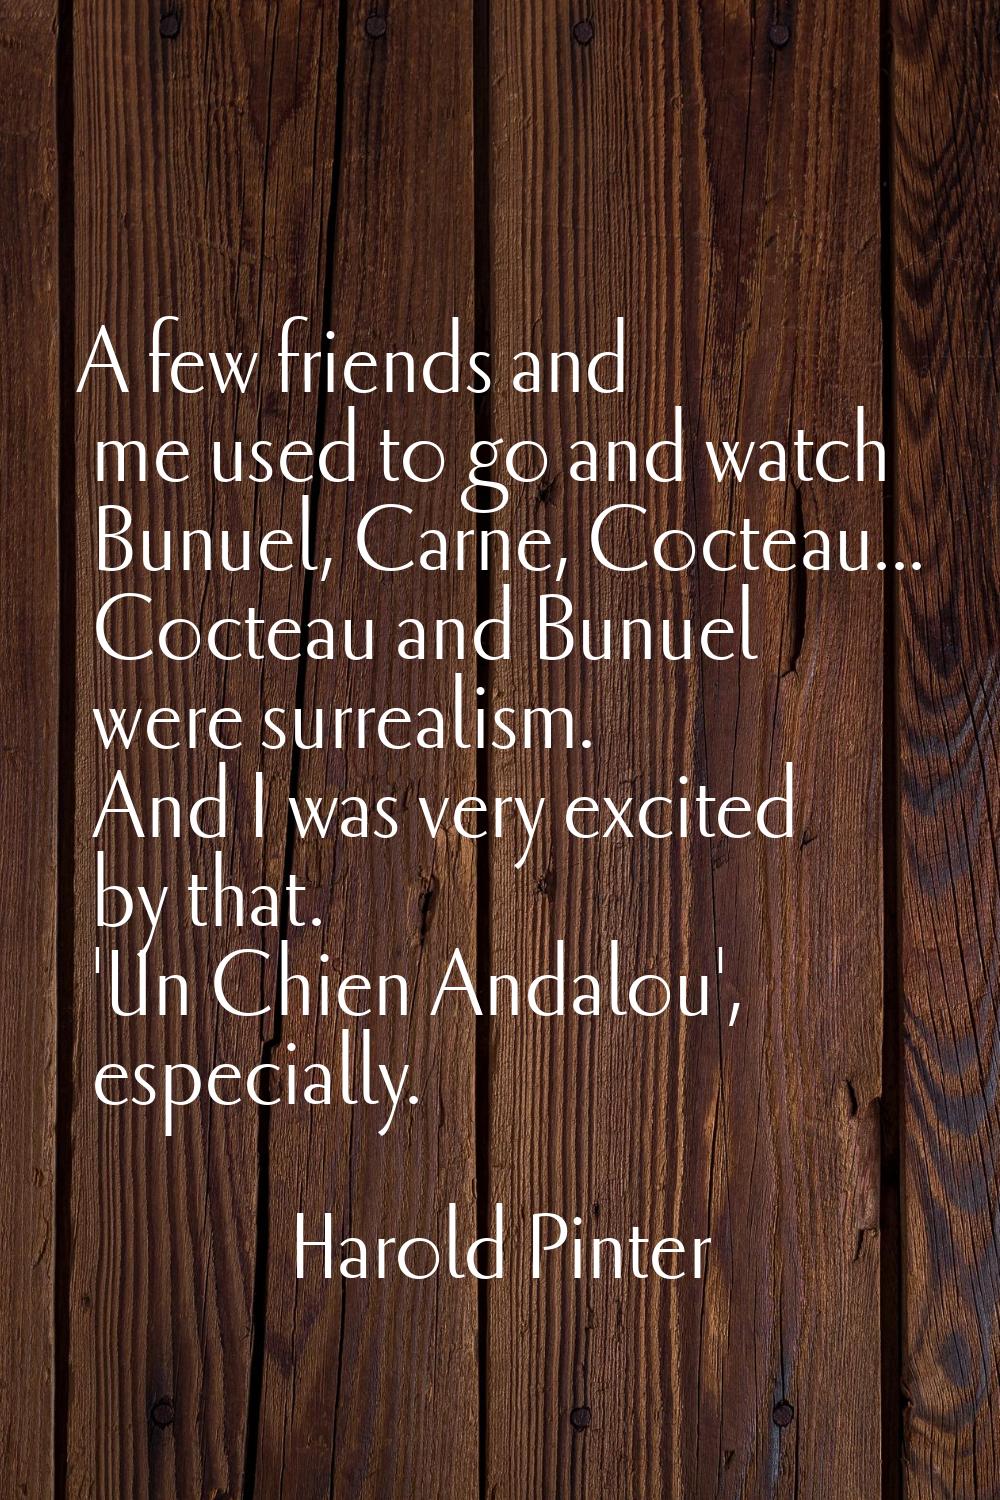 A few friends and me used to go and watch Bunuel, Carne, Cocteau... Cocteau and Bunuel were surreal